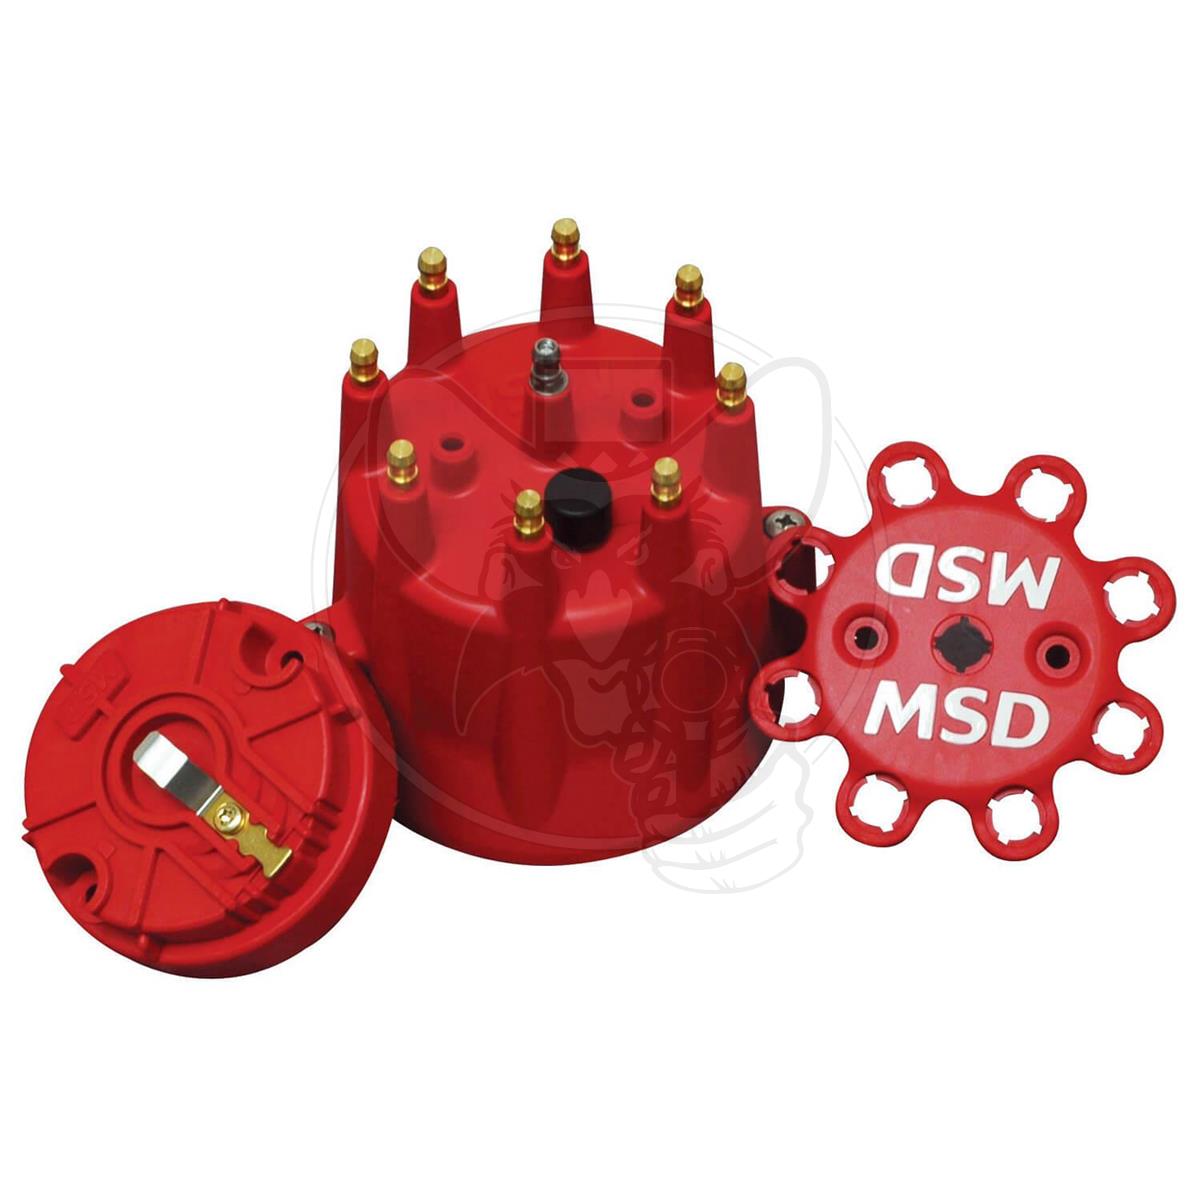 MSD HEI CAP & ROTOR FITS EARLY CHEV V8 POINTS DISTRIBUTOR RED